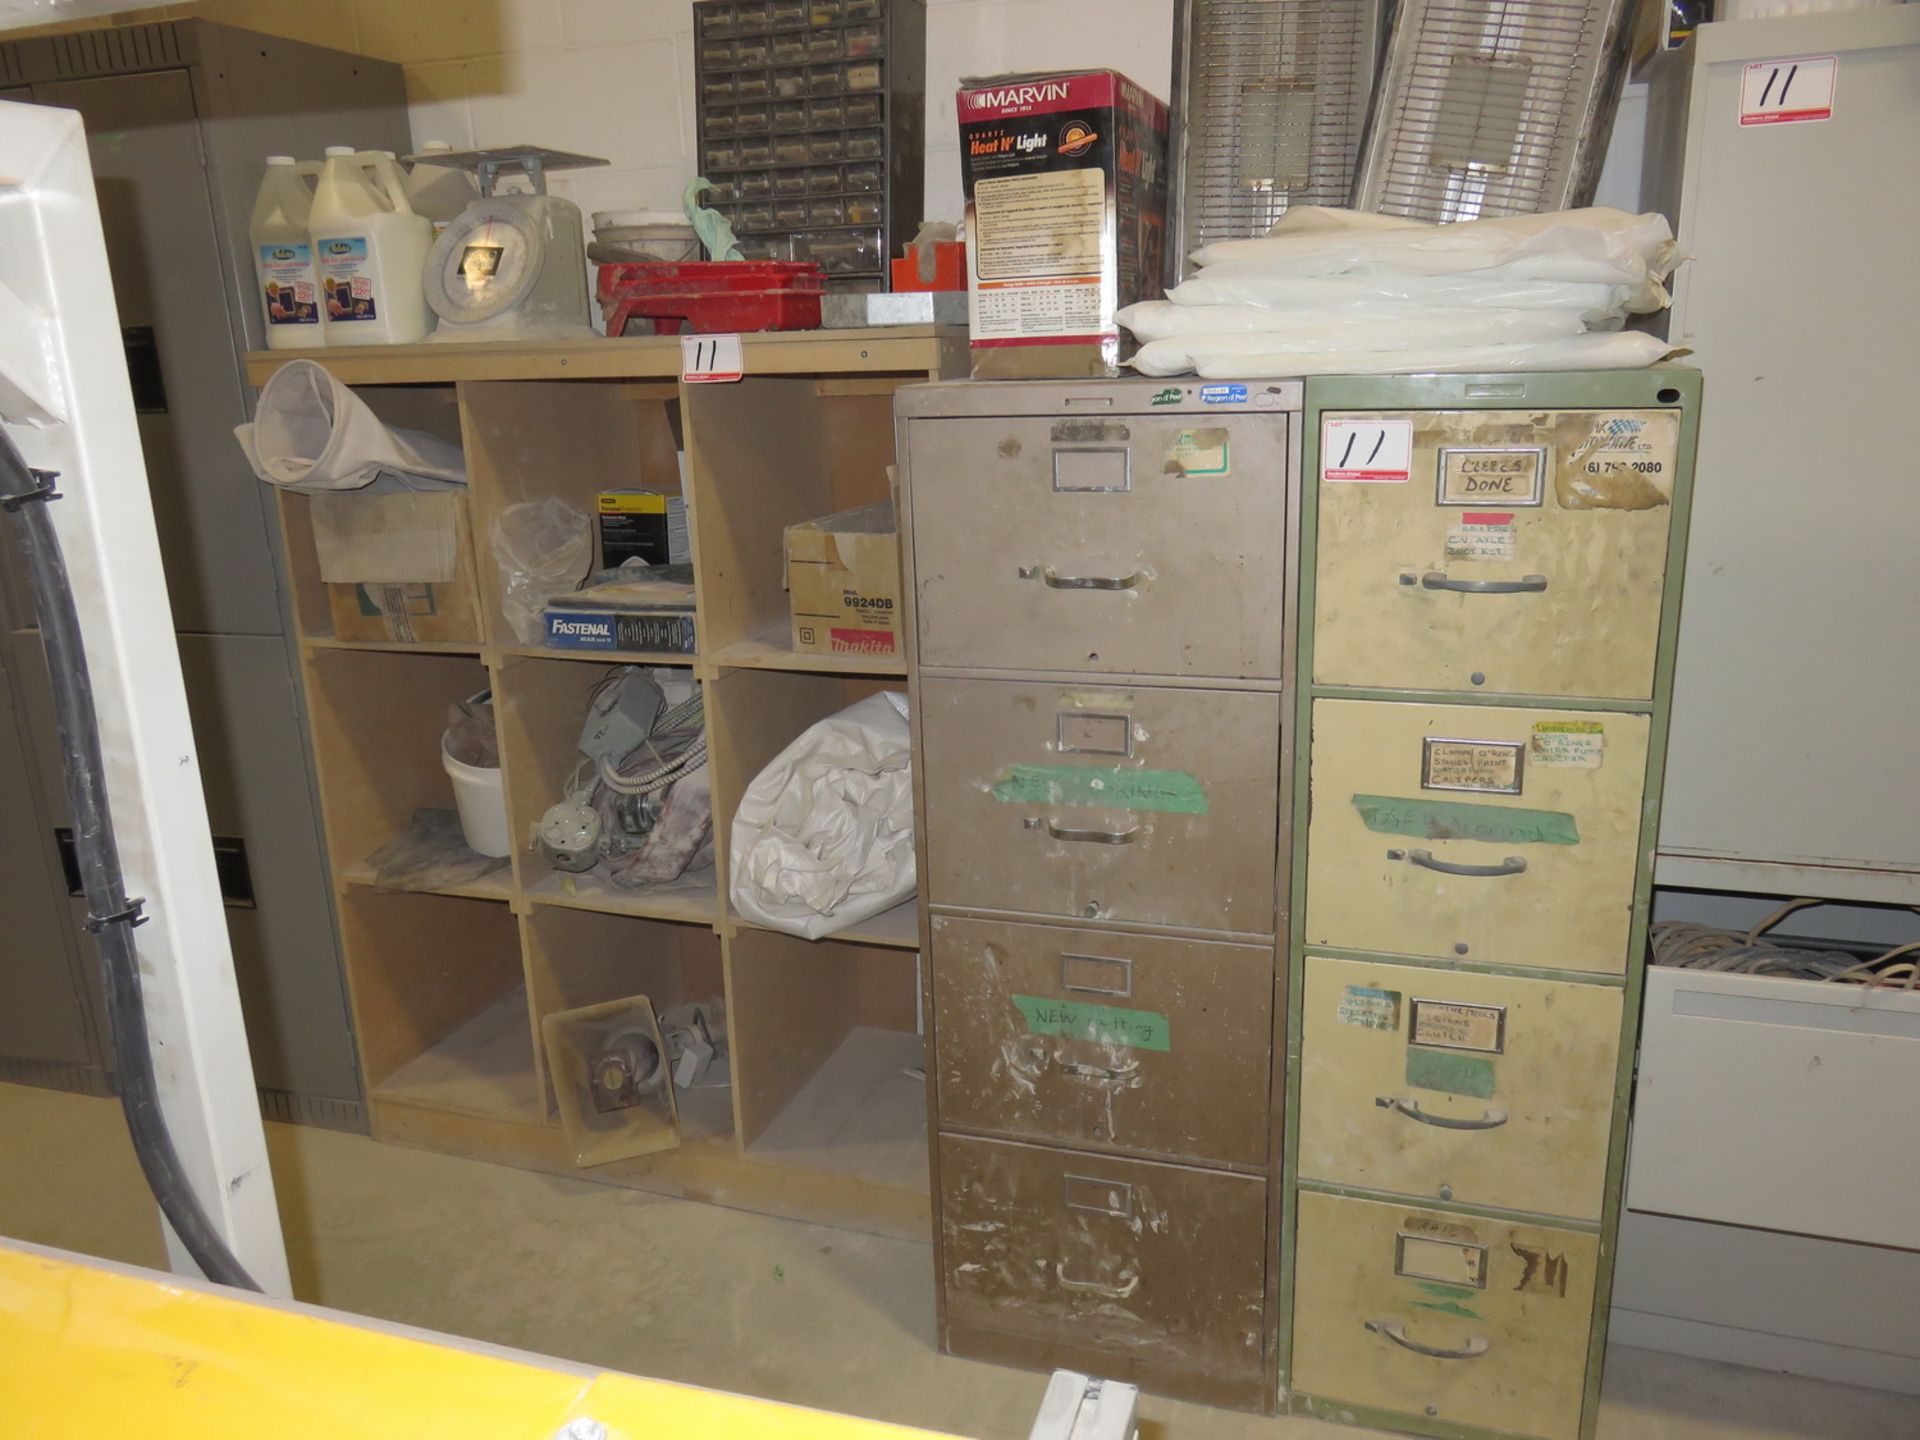 LOT - METAL & WOOD CABINETS + SHELF W/ EXTENSION CORDS, SCREWS, 35 X 45" APRONS, GLUE, ETC & - Image 2 of 2